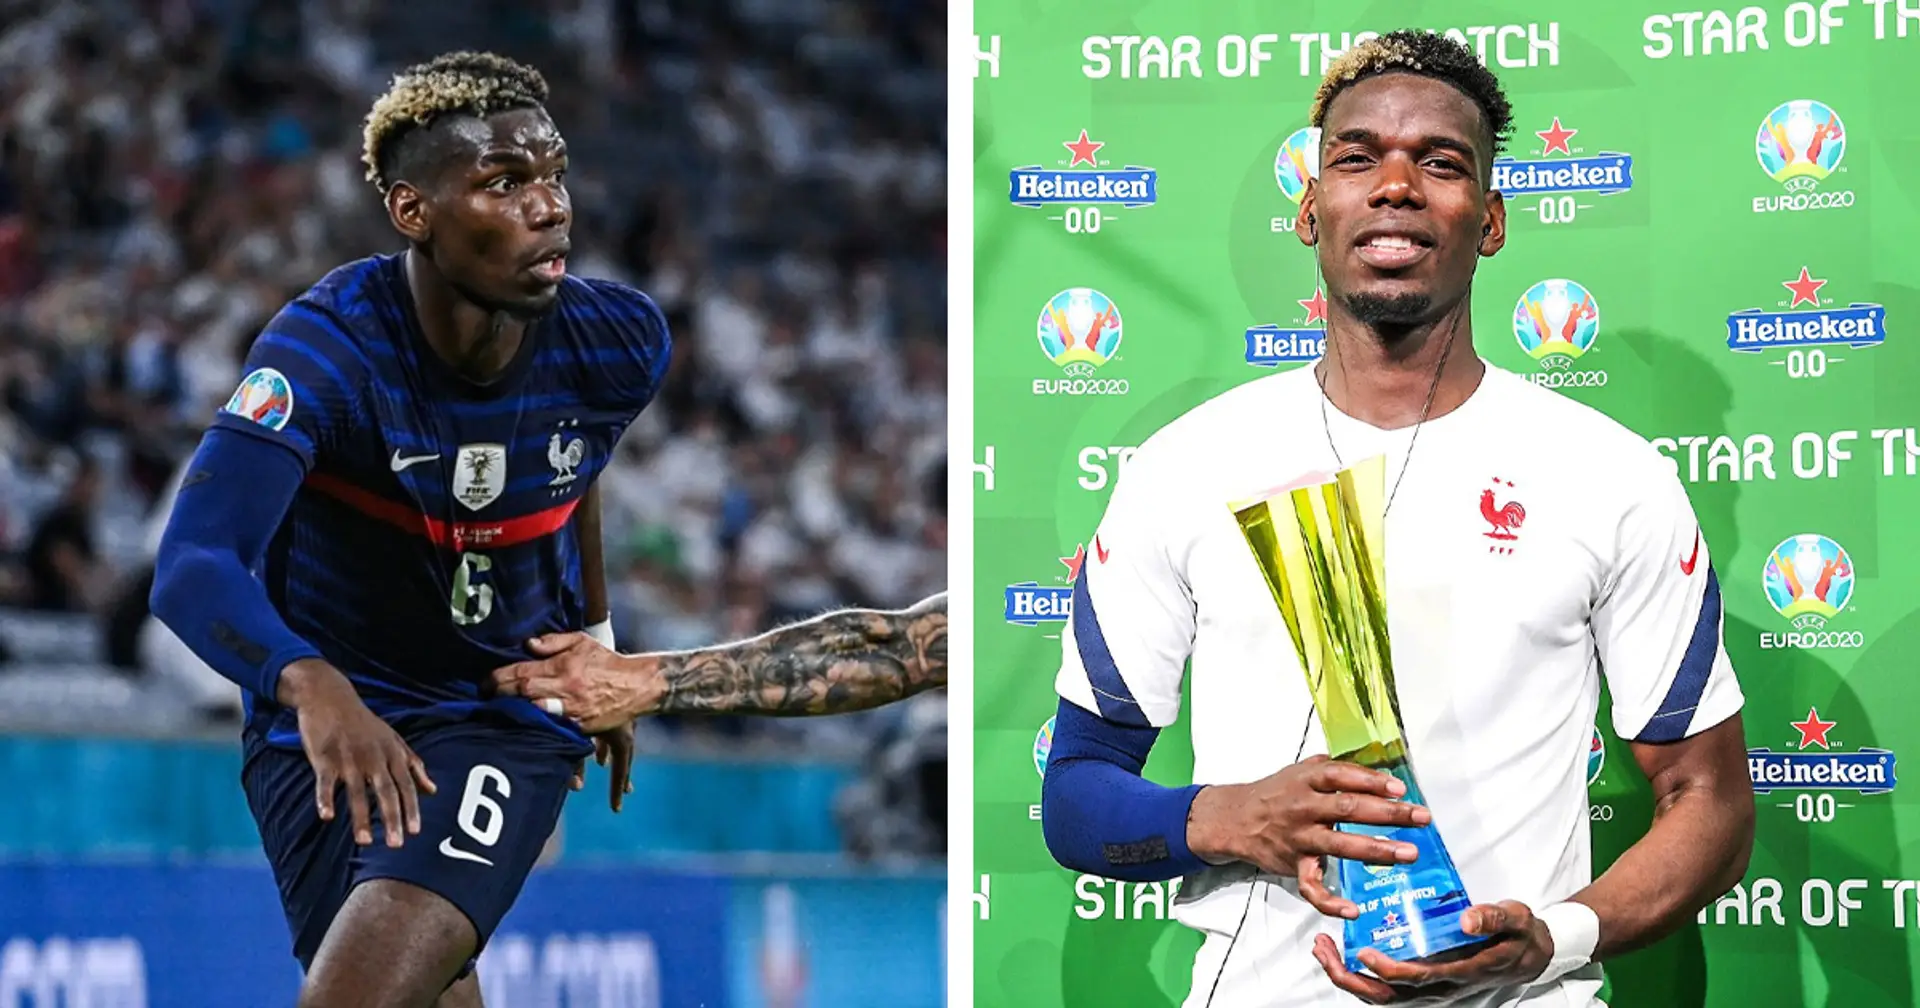 Paul Pogba named Man of the Match in France vs Germany: best stats from his brilliant display